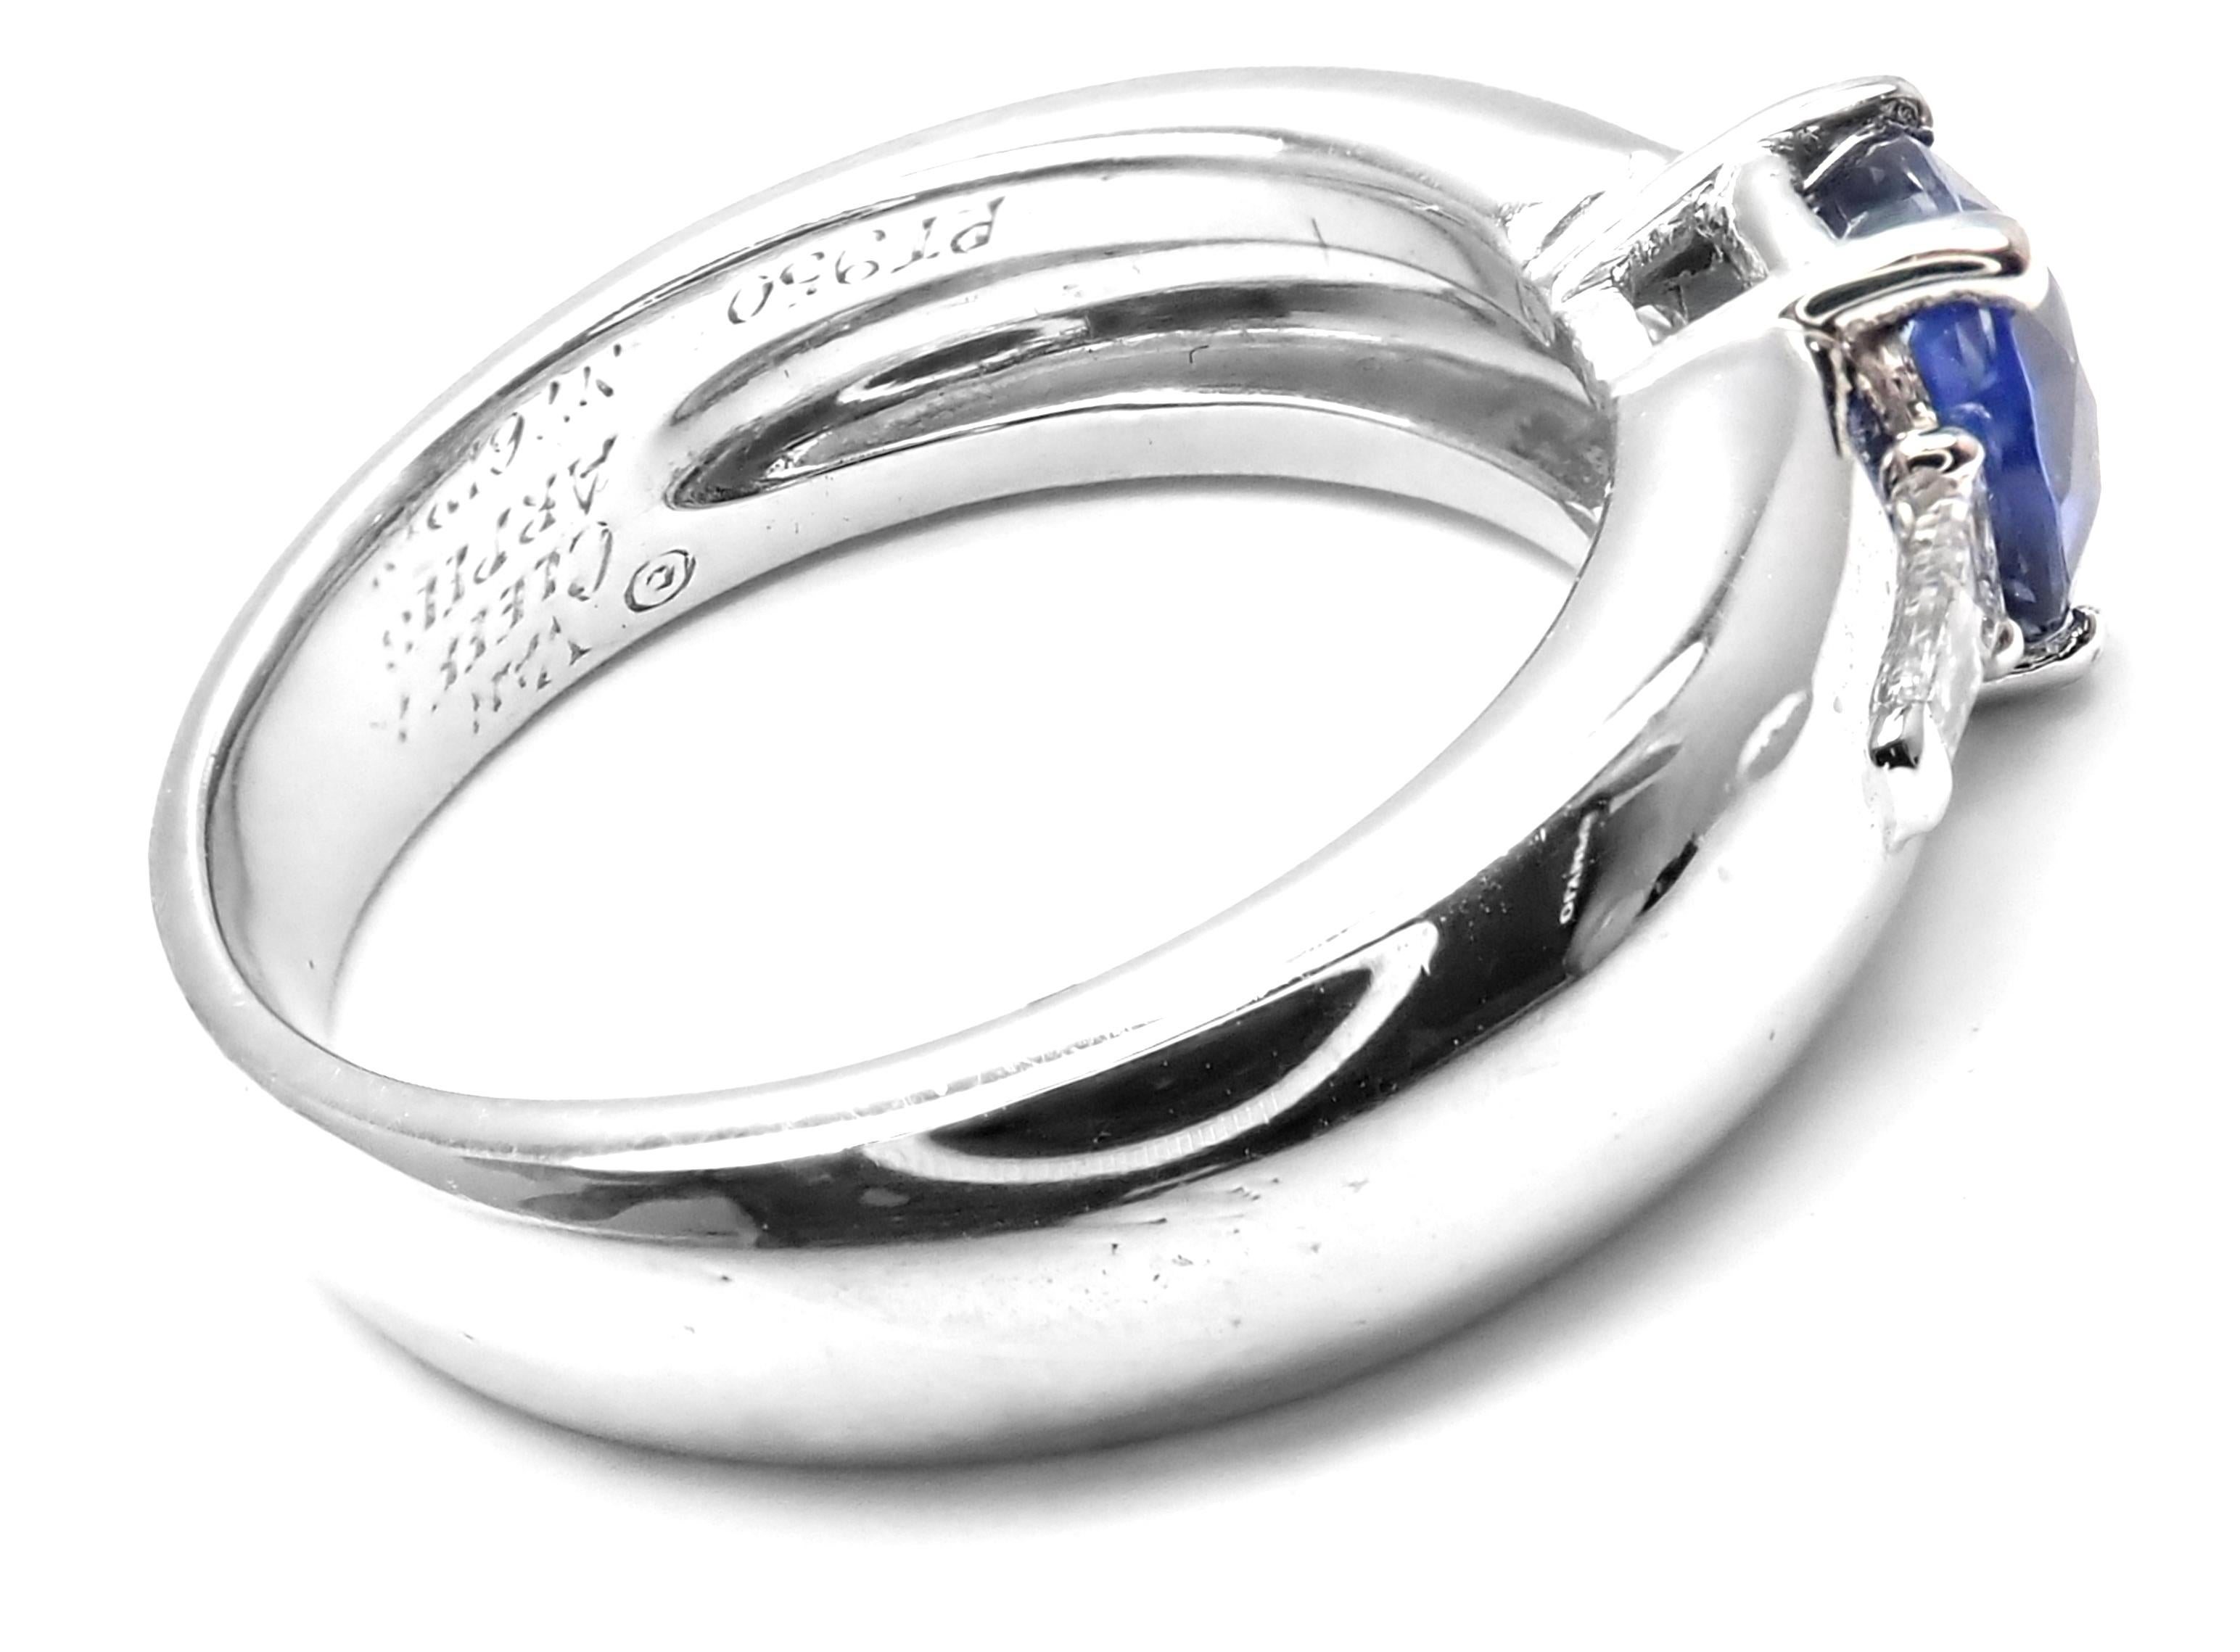 Platinum Diamond & Sapphire Band Ring by Van Cleef & Arpels.
With 1 round natural sapphire 1.63ct
2 baguette cut diamonds
This ring comes with GAL certification for the sapphire.
Details:
Ring Size: 6.5 (resizable)
Width: 11mm
Weight: 11.7